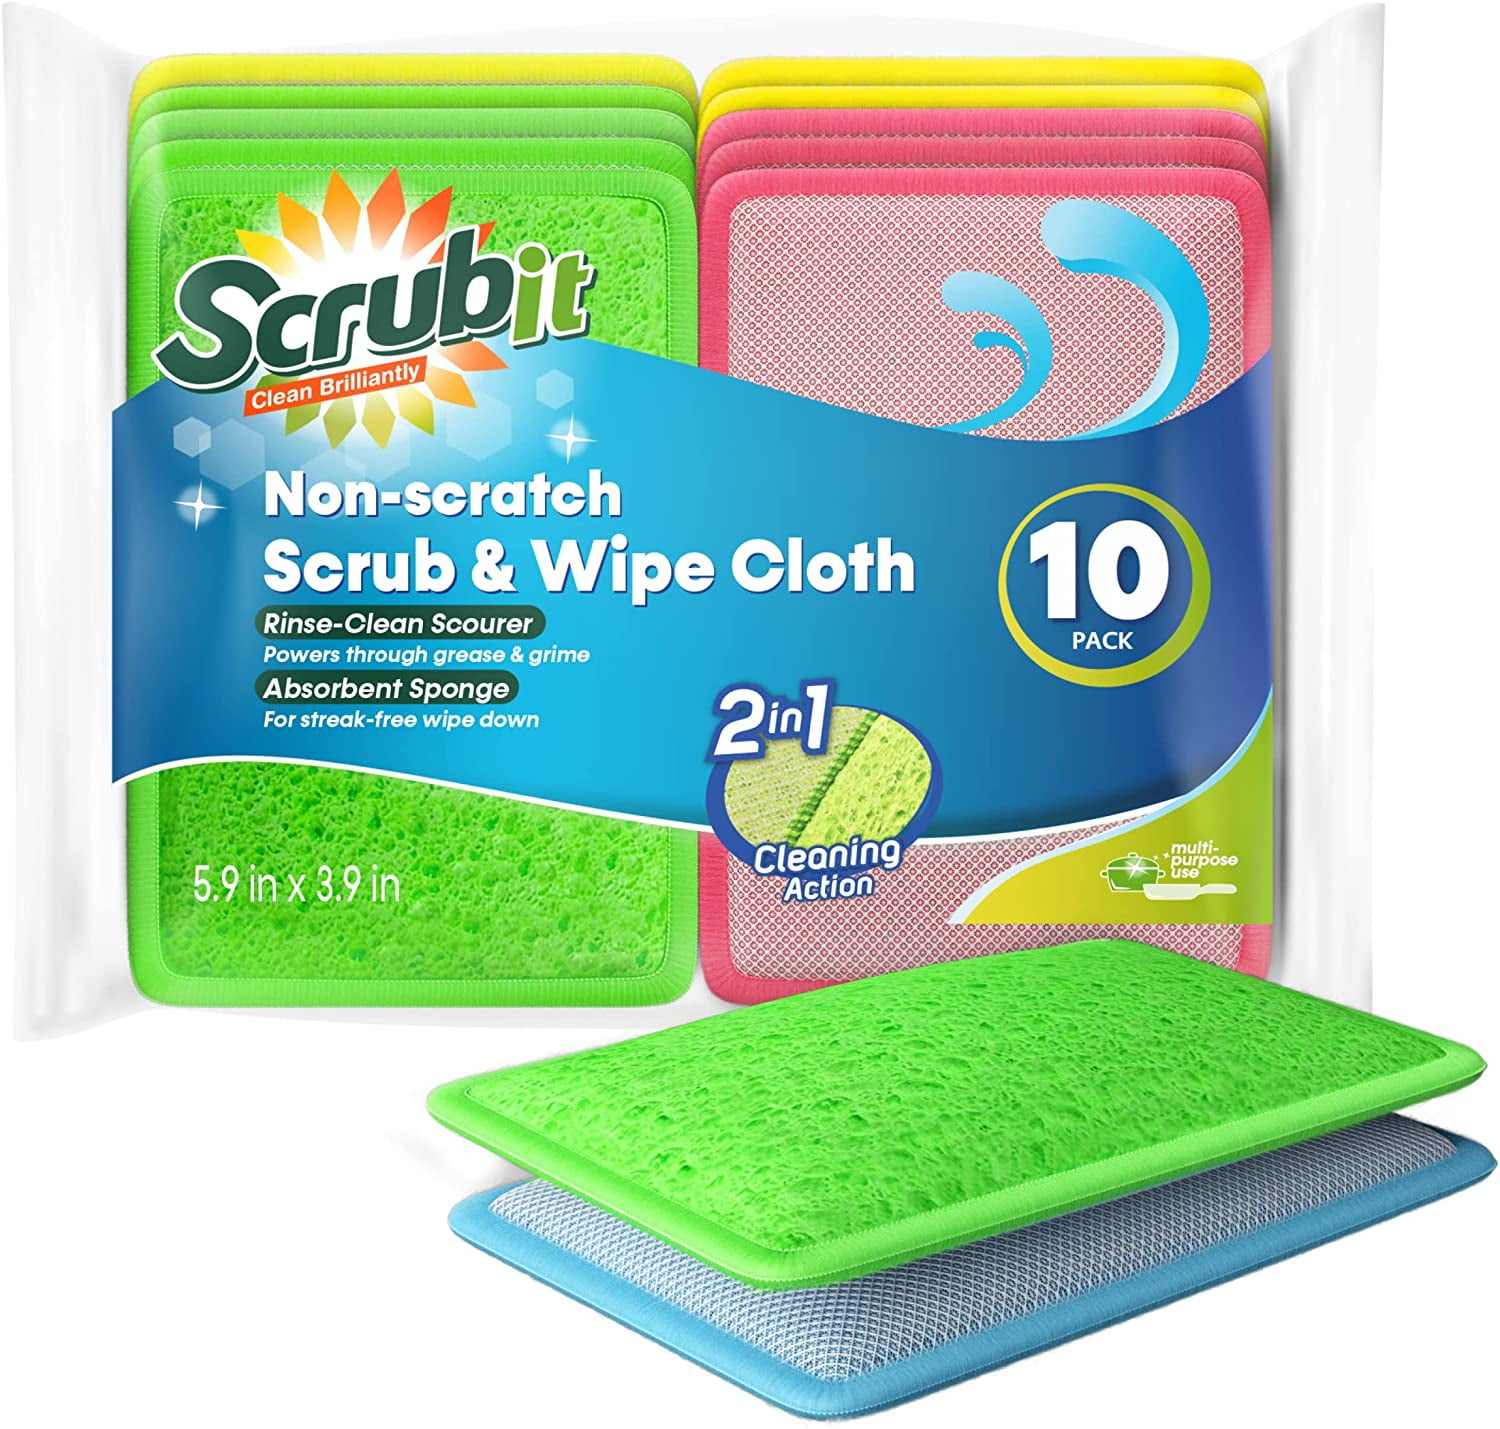 If You Care 100% Natural Sponge Cloths - 5 count